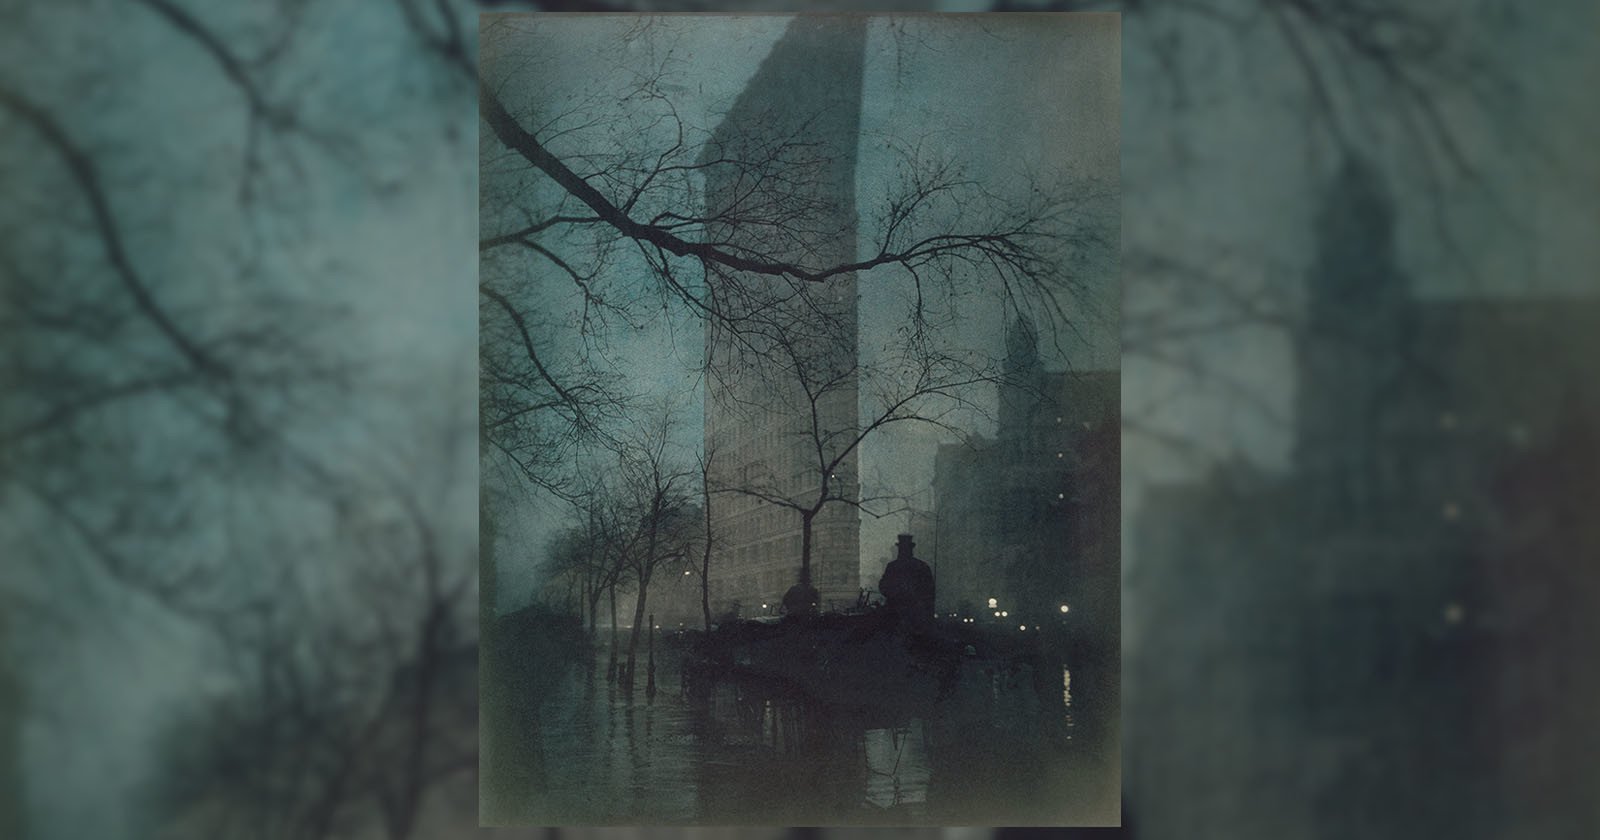 Edward Steichens Image of New York Could Break the Photo Auction Record